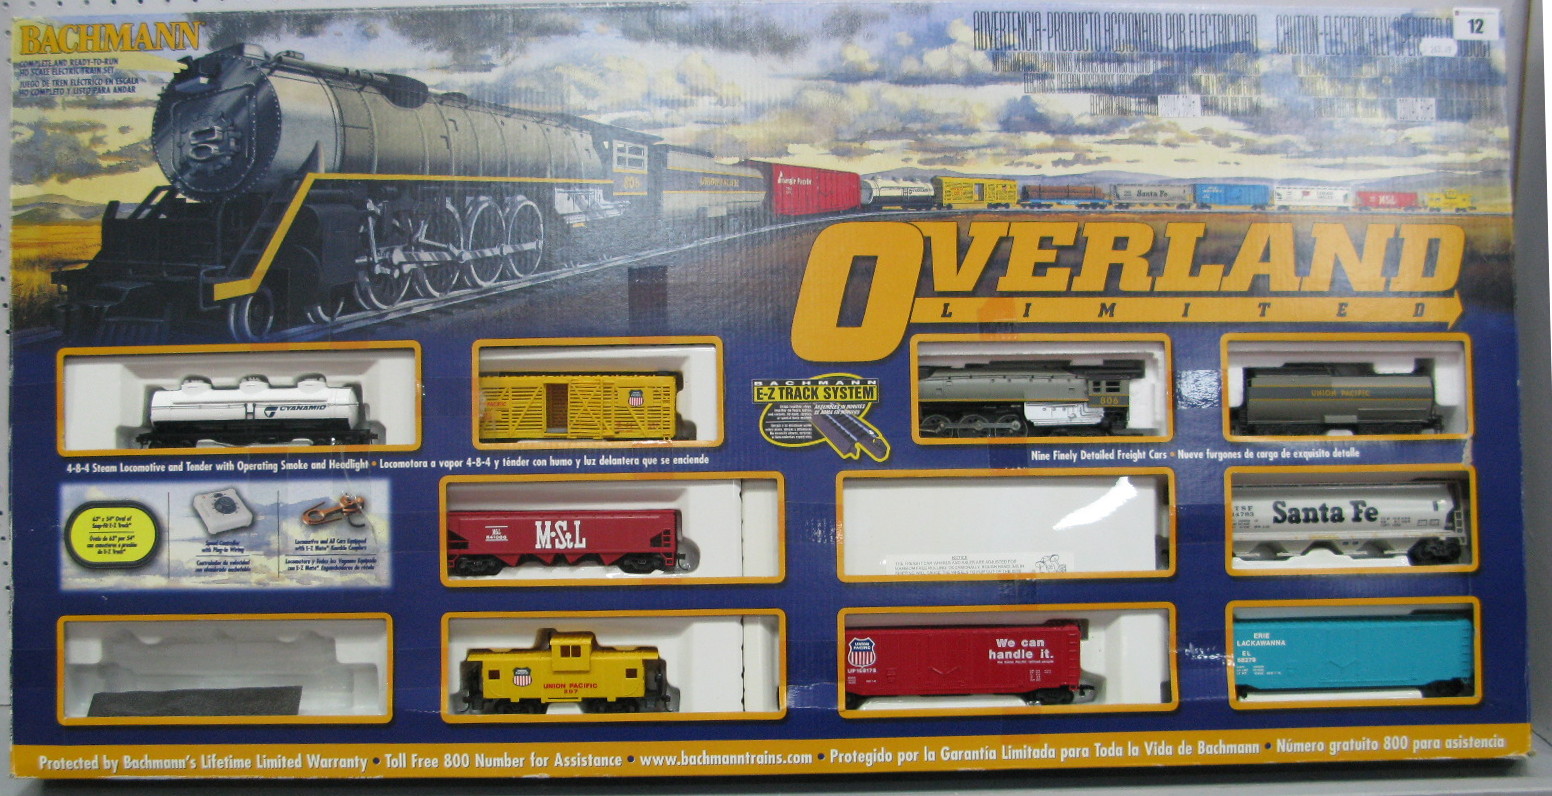 A Boxed Bachmann Overland Limited "HO" Gauge Outline American Train Set, comprising of 4-8-4 Steam